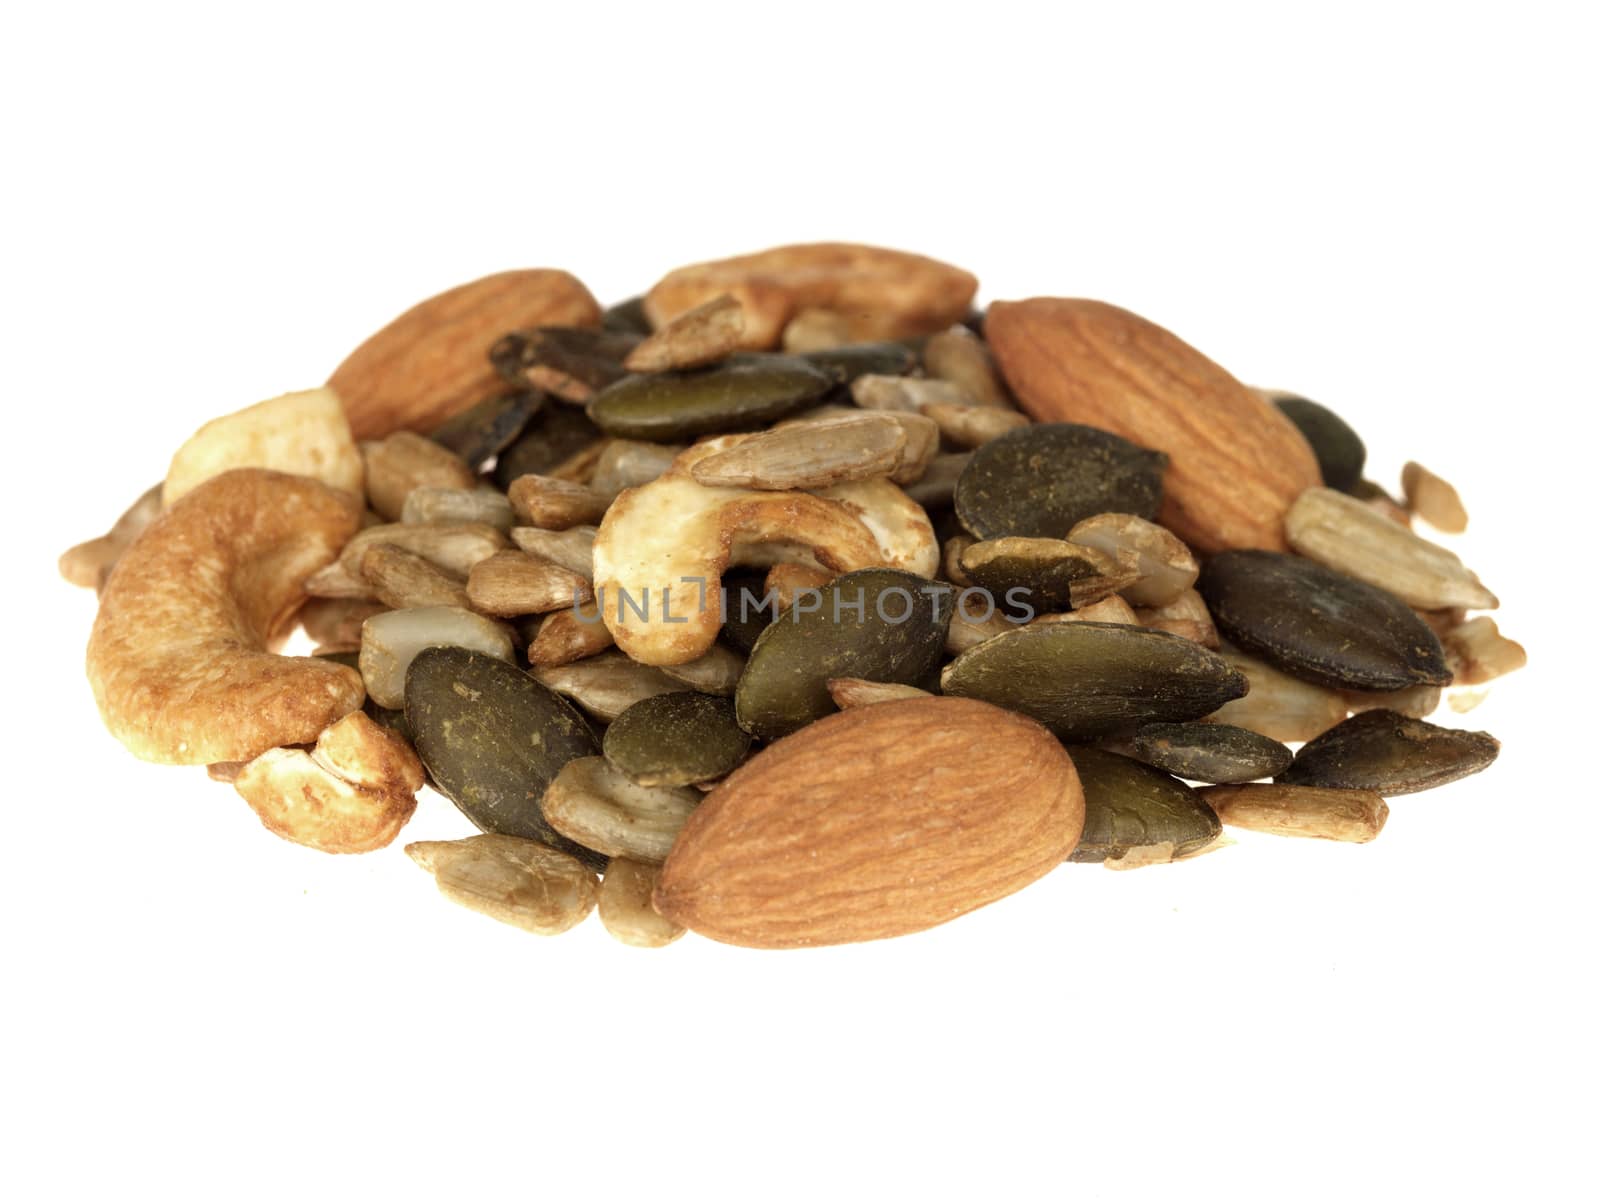 Seed and Nut Mix by Whiteboxmedia